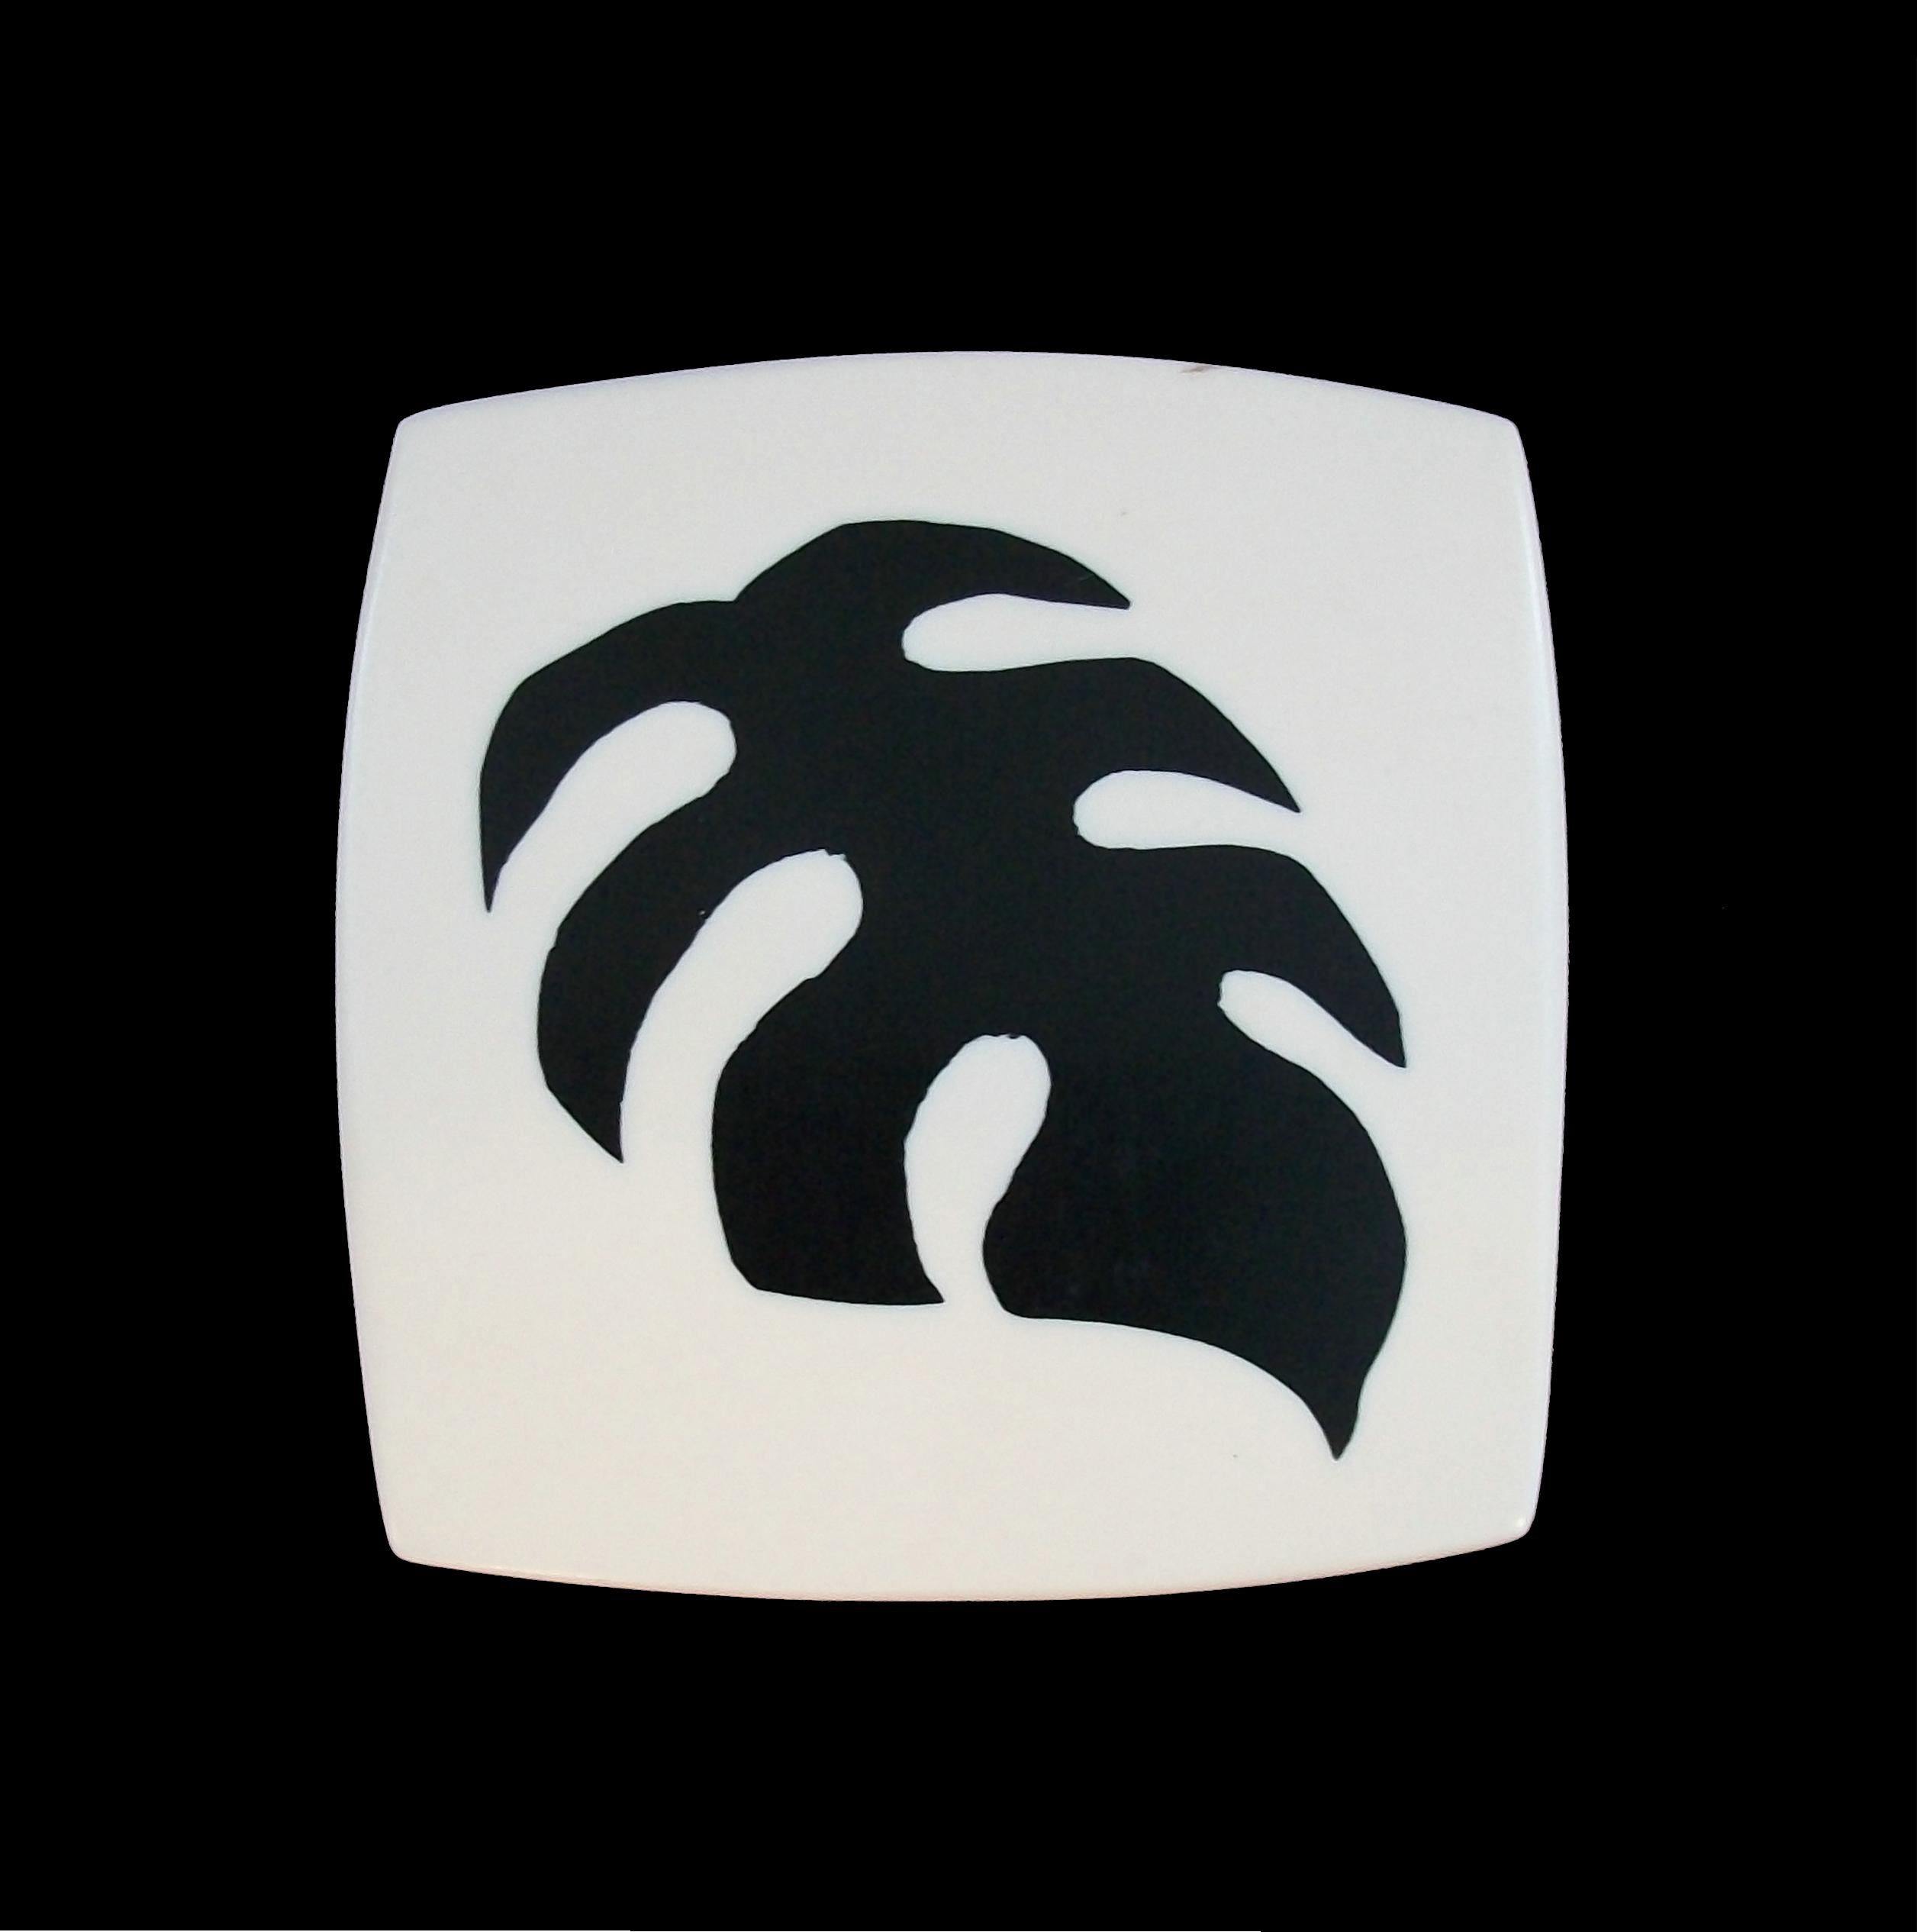 HANS HANSEN - Mid century resin 'leaf' brooch - contrasting black and ivory colors - original hinge, pin and catch - signed with the original foil label to the back - Denmark - circa 1960's.

Excellent vintage condition - no loss - no damage - no